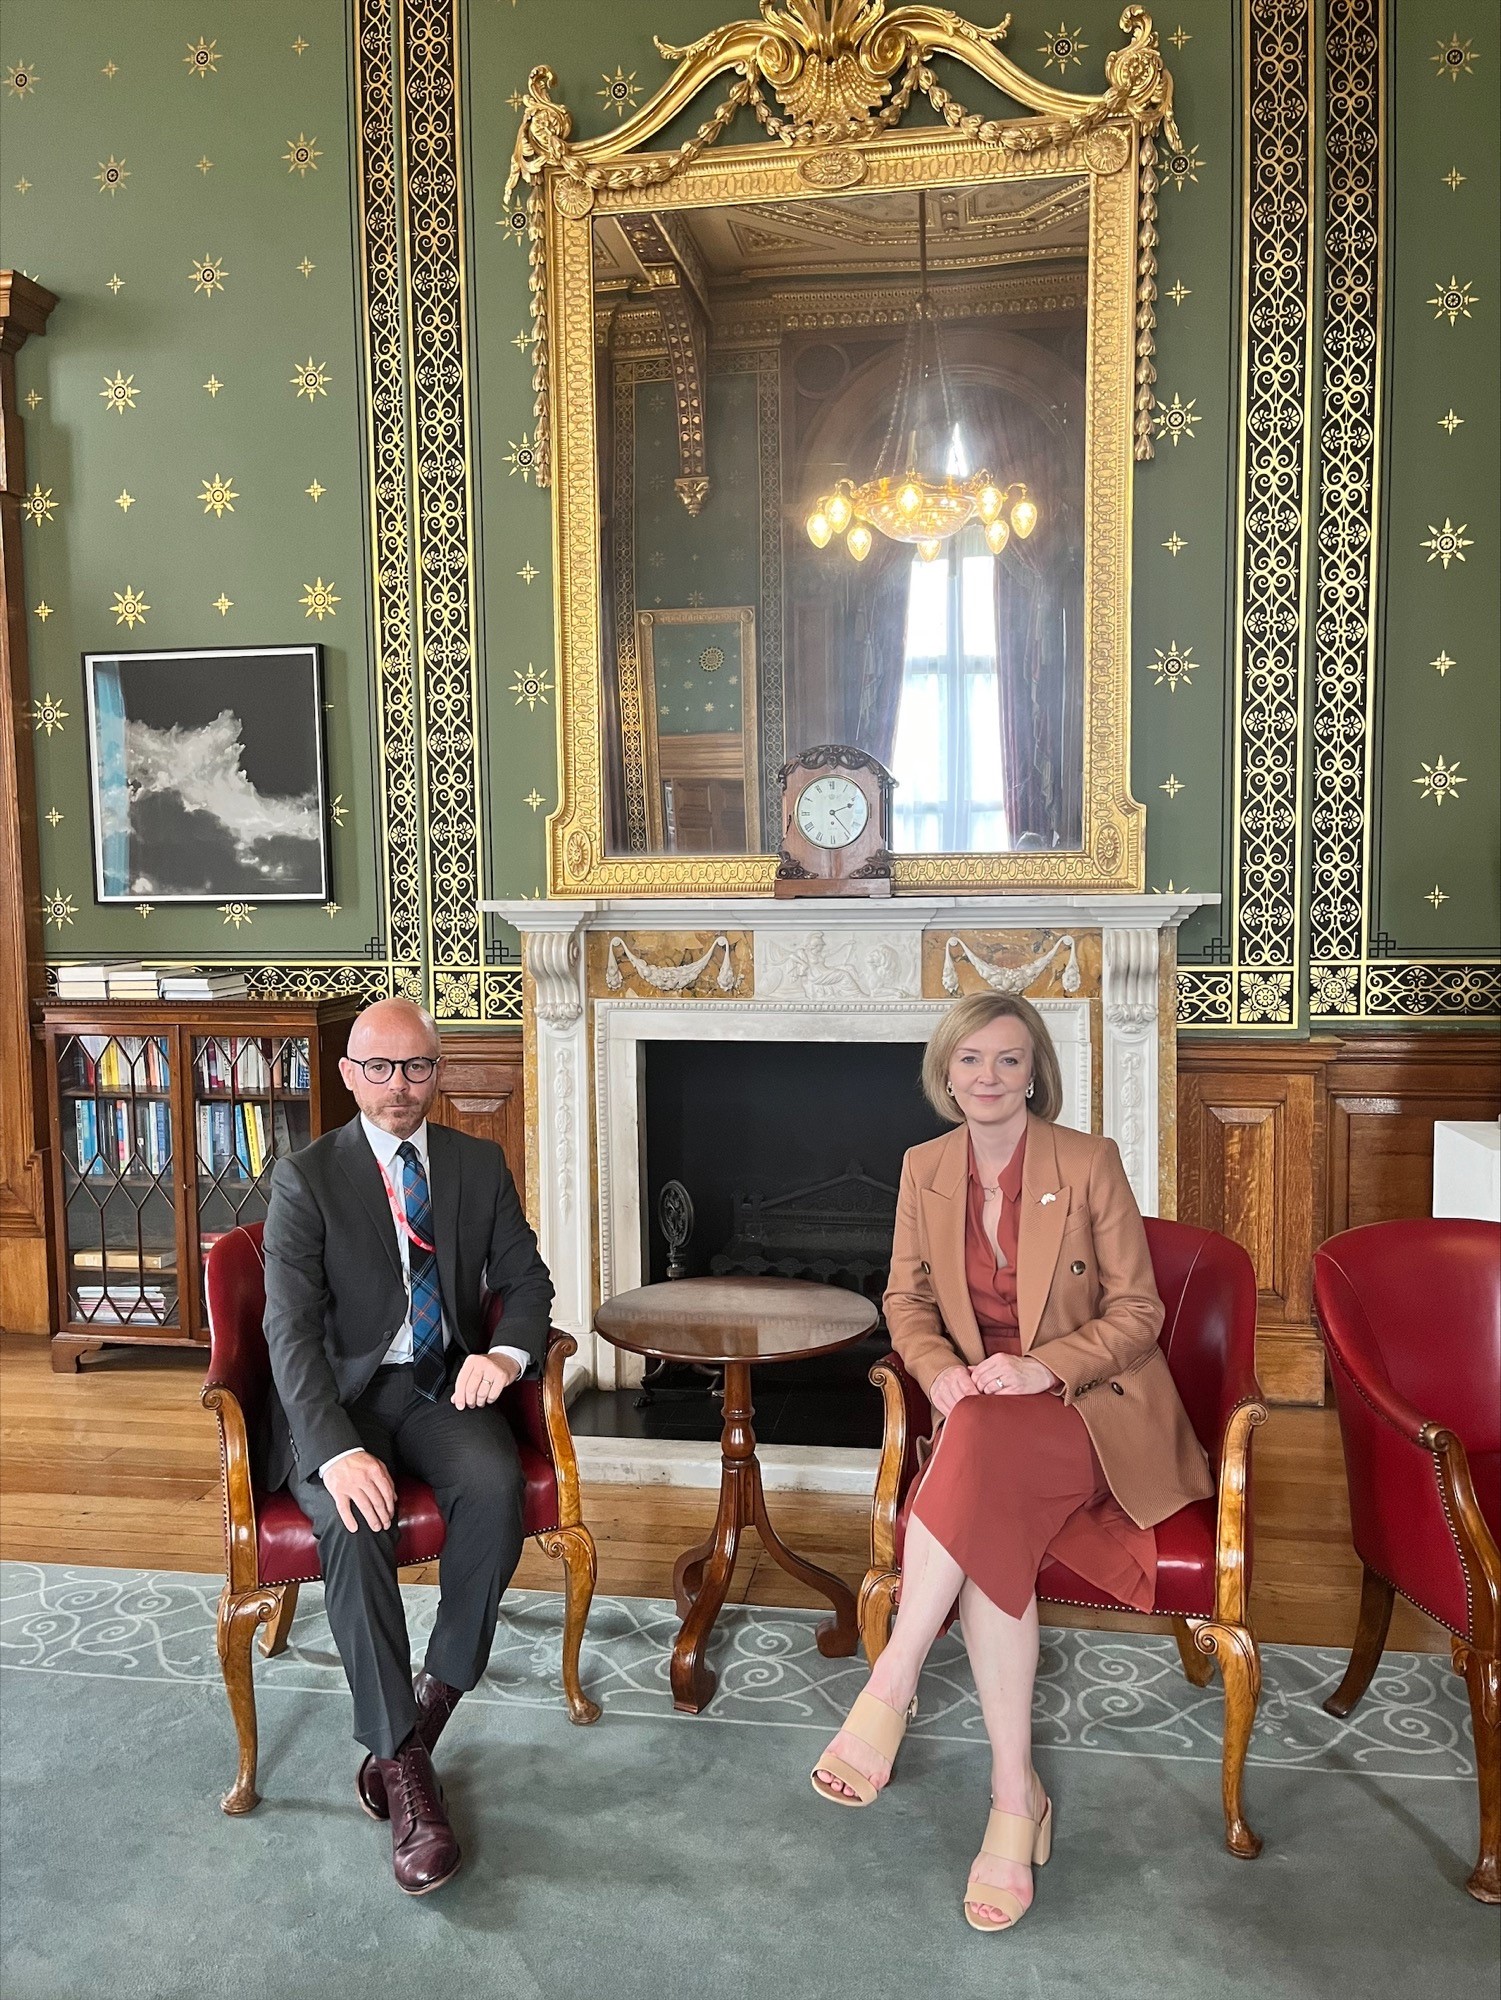 Jagtar's MP, Martin Docherty-Hughes, met with Liz Truss and urged her to step-up efforts to bring him home.